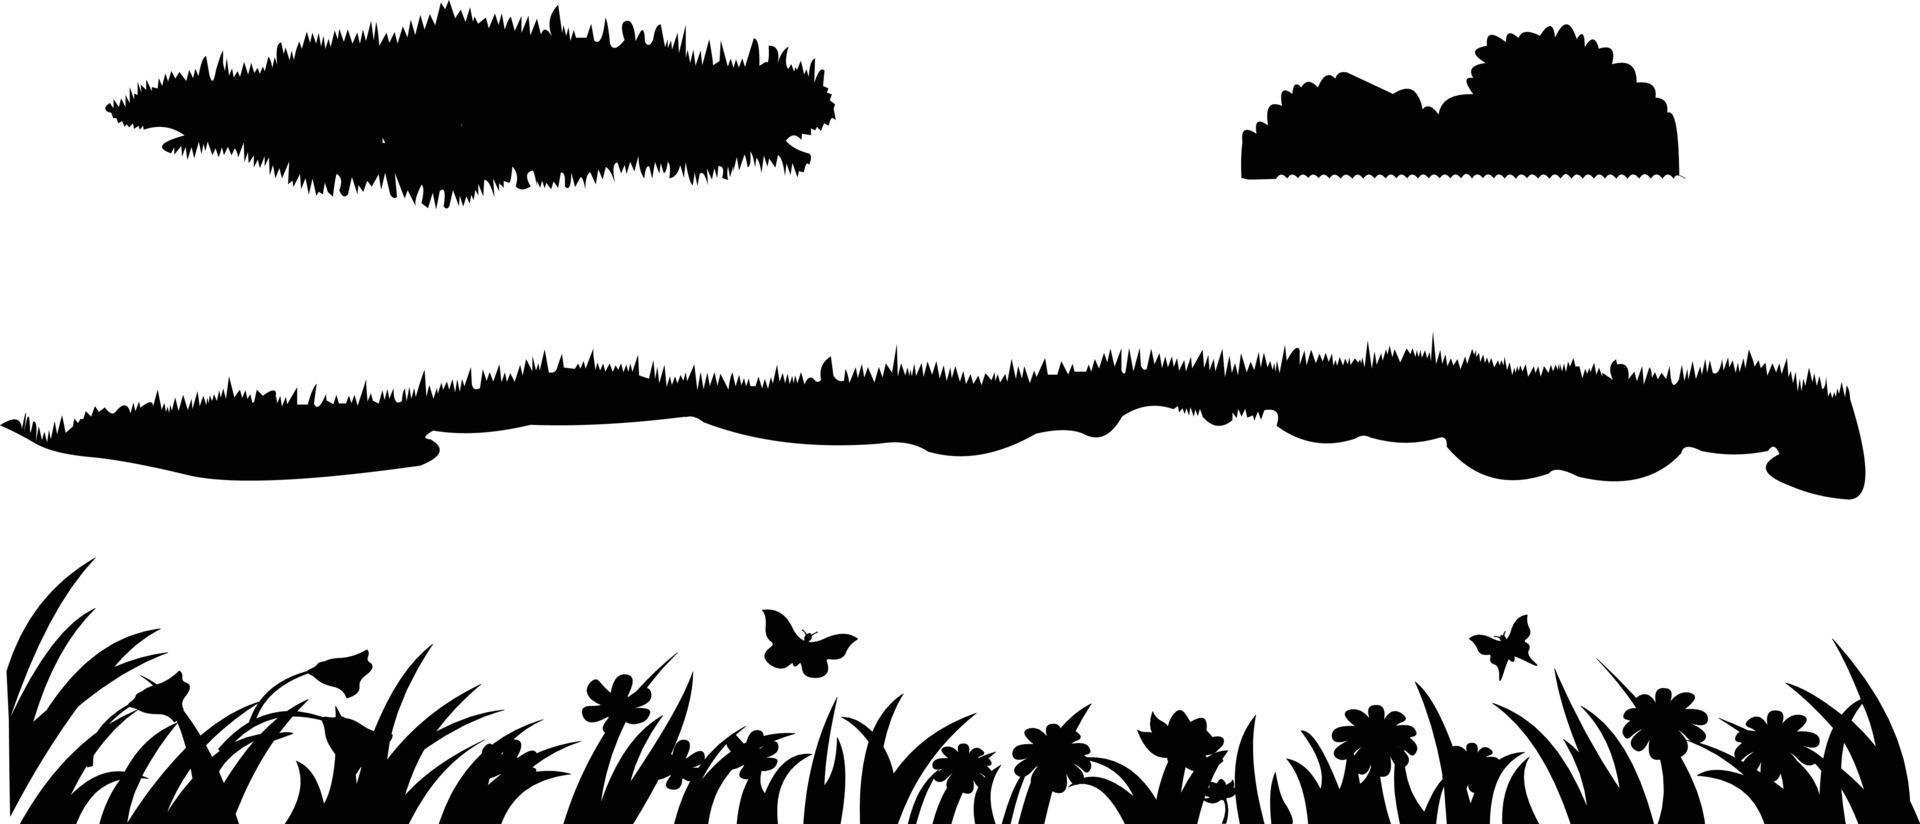 Set of horizontal silhouettes with grass vector illustration.